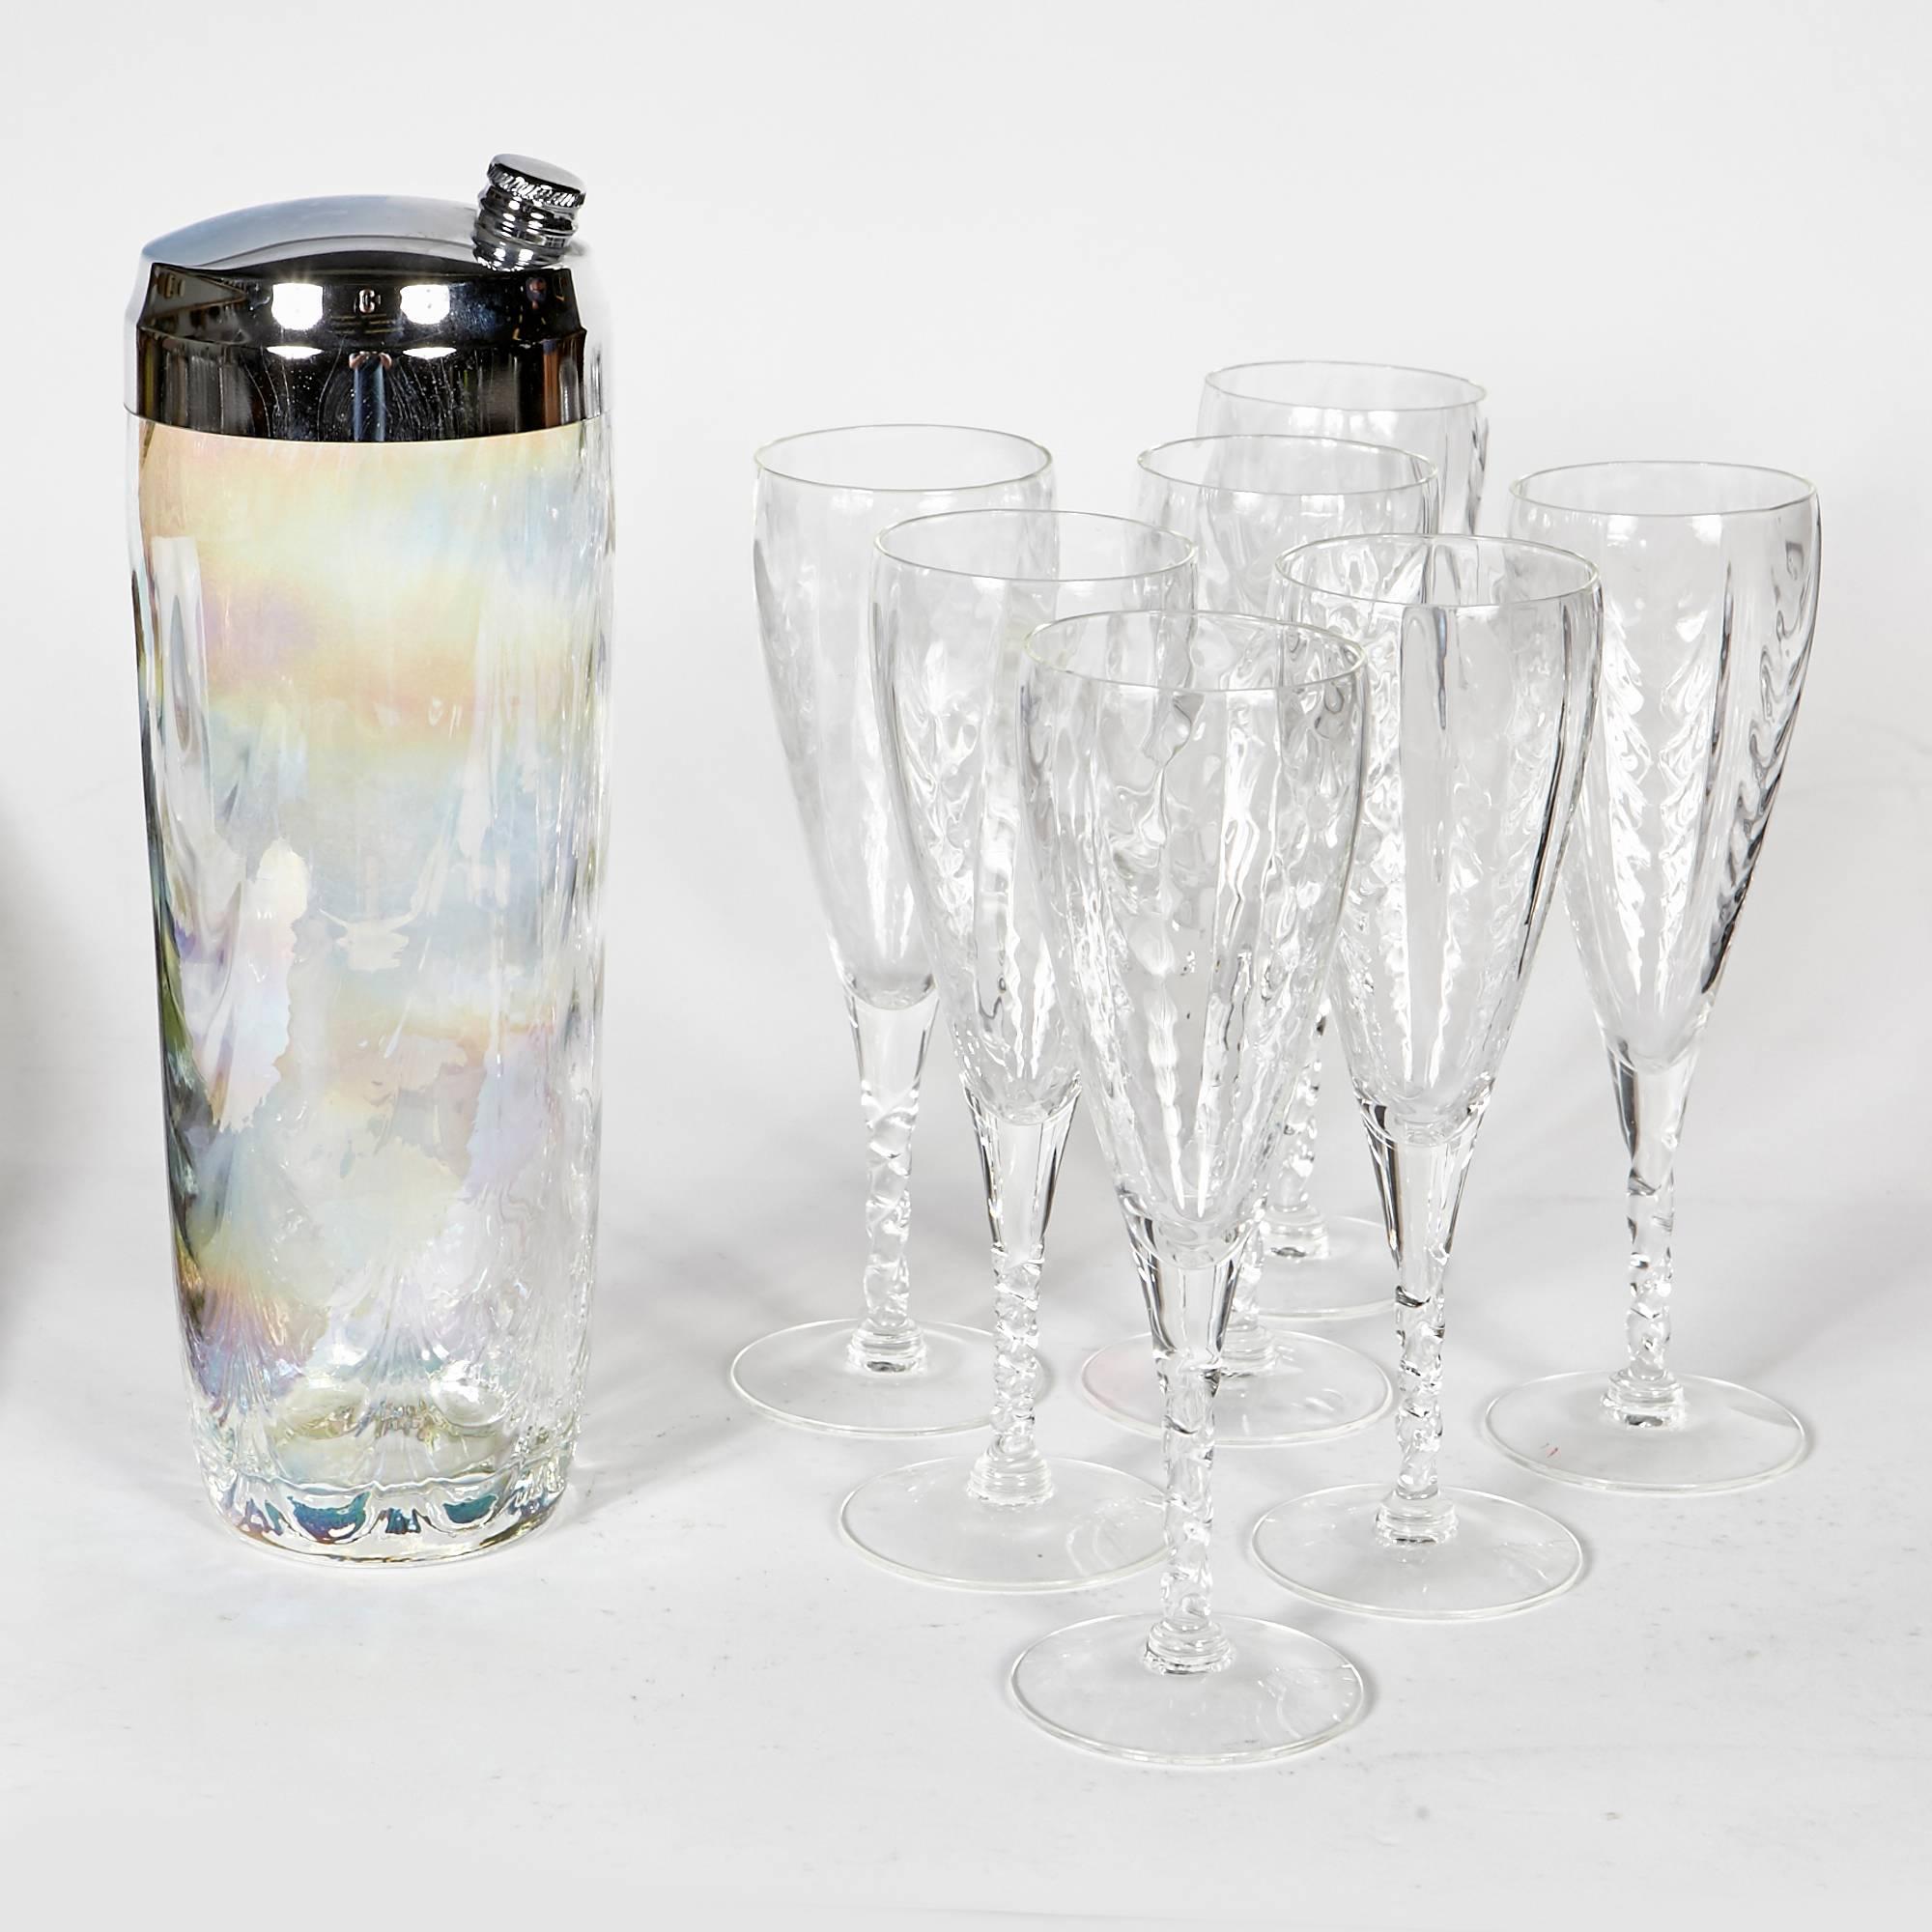 1950s Iridescent Glass Beverage Entertainment Set of 32 Pieces In Excellent Condition For Sale In Amherst, NH